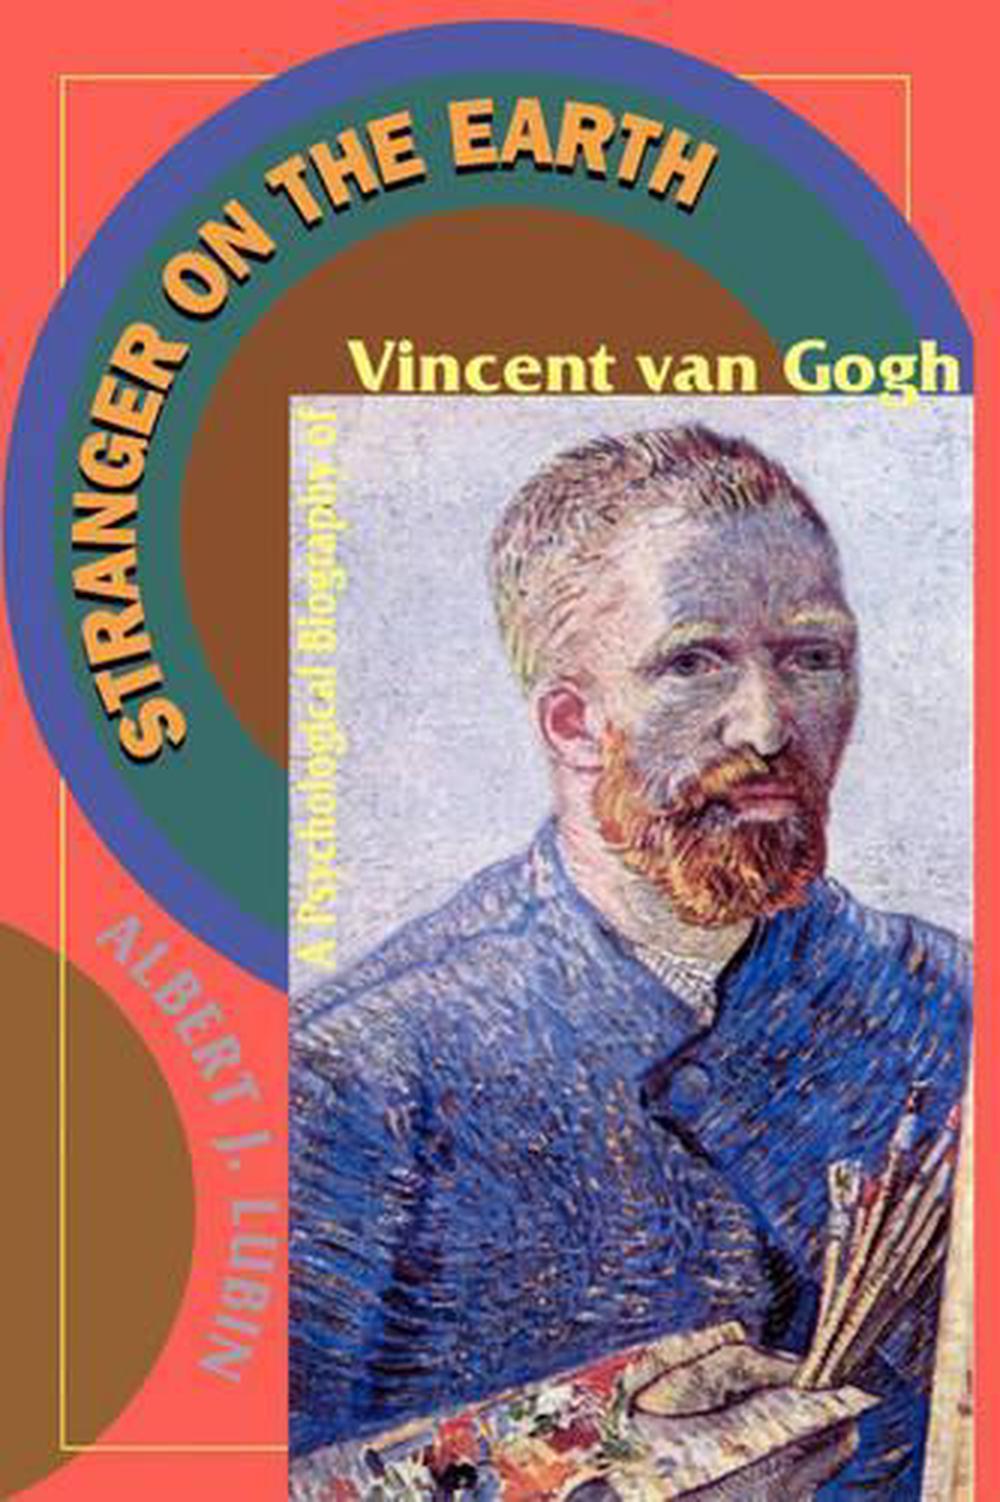 Stranger on the Earth A Psychological Biography of Vincent Van Gogh by